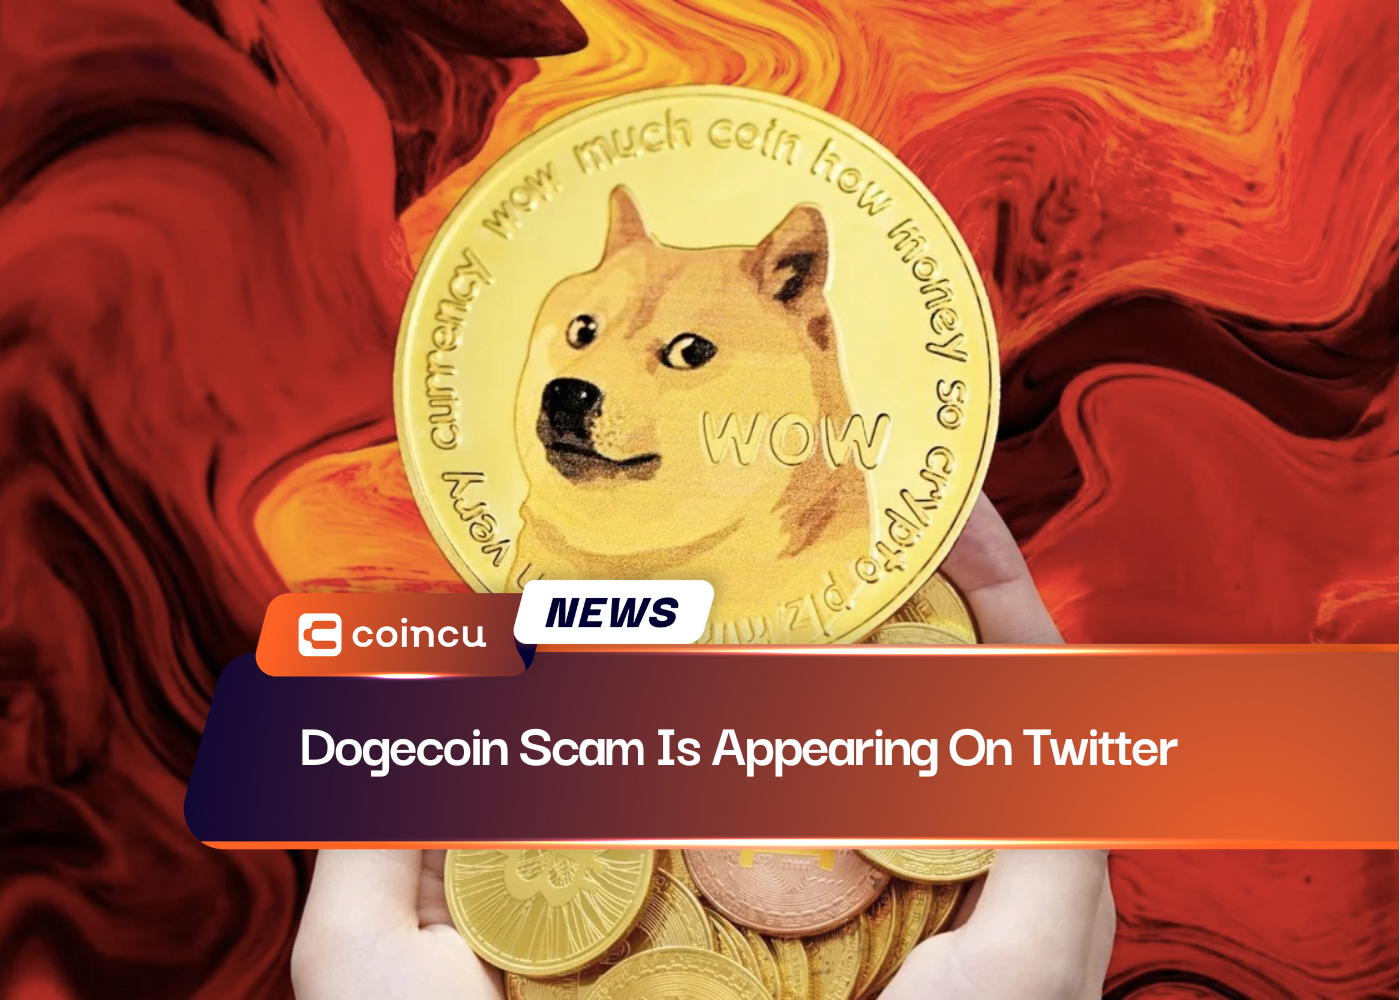 Dogecoin Scam Is Appearing On Twitter